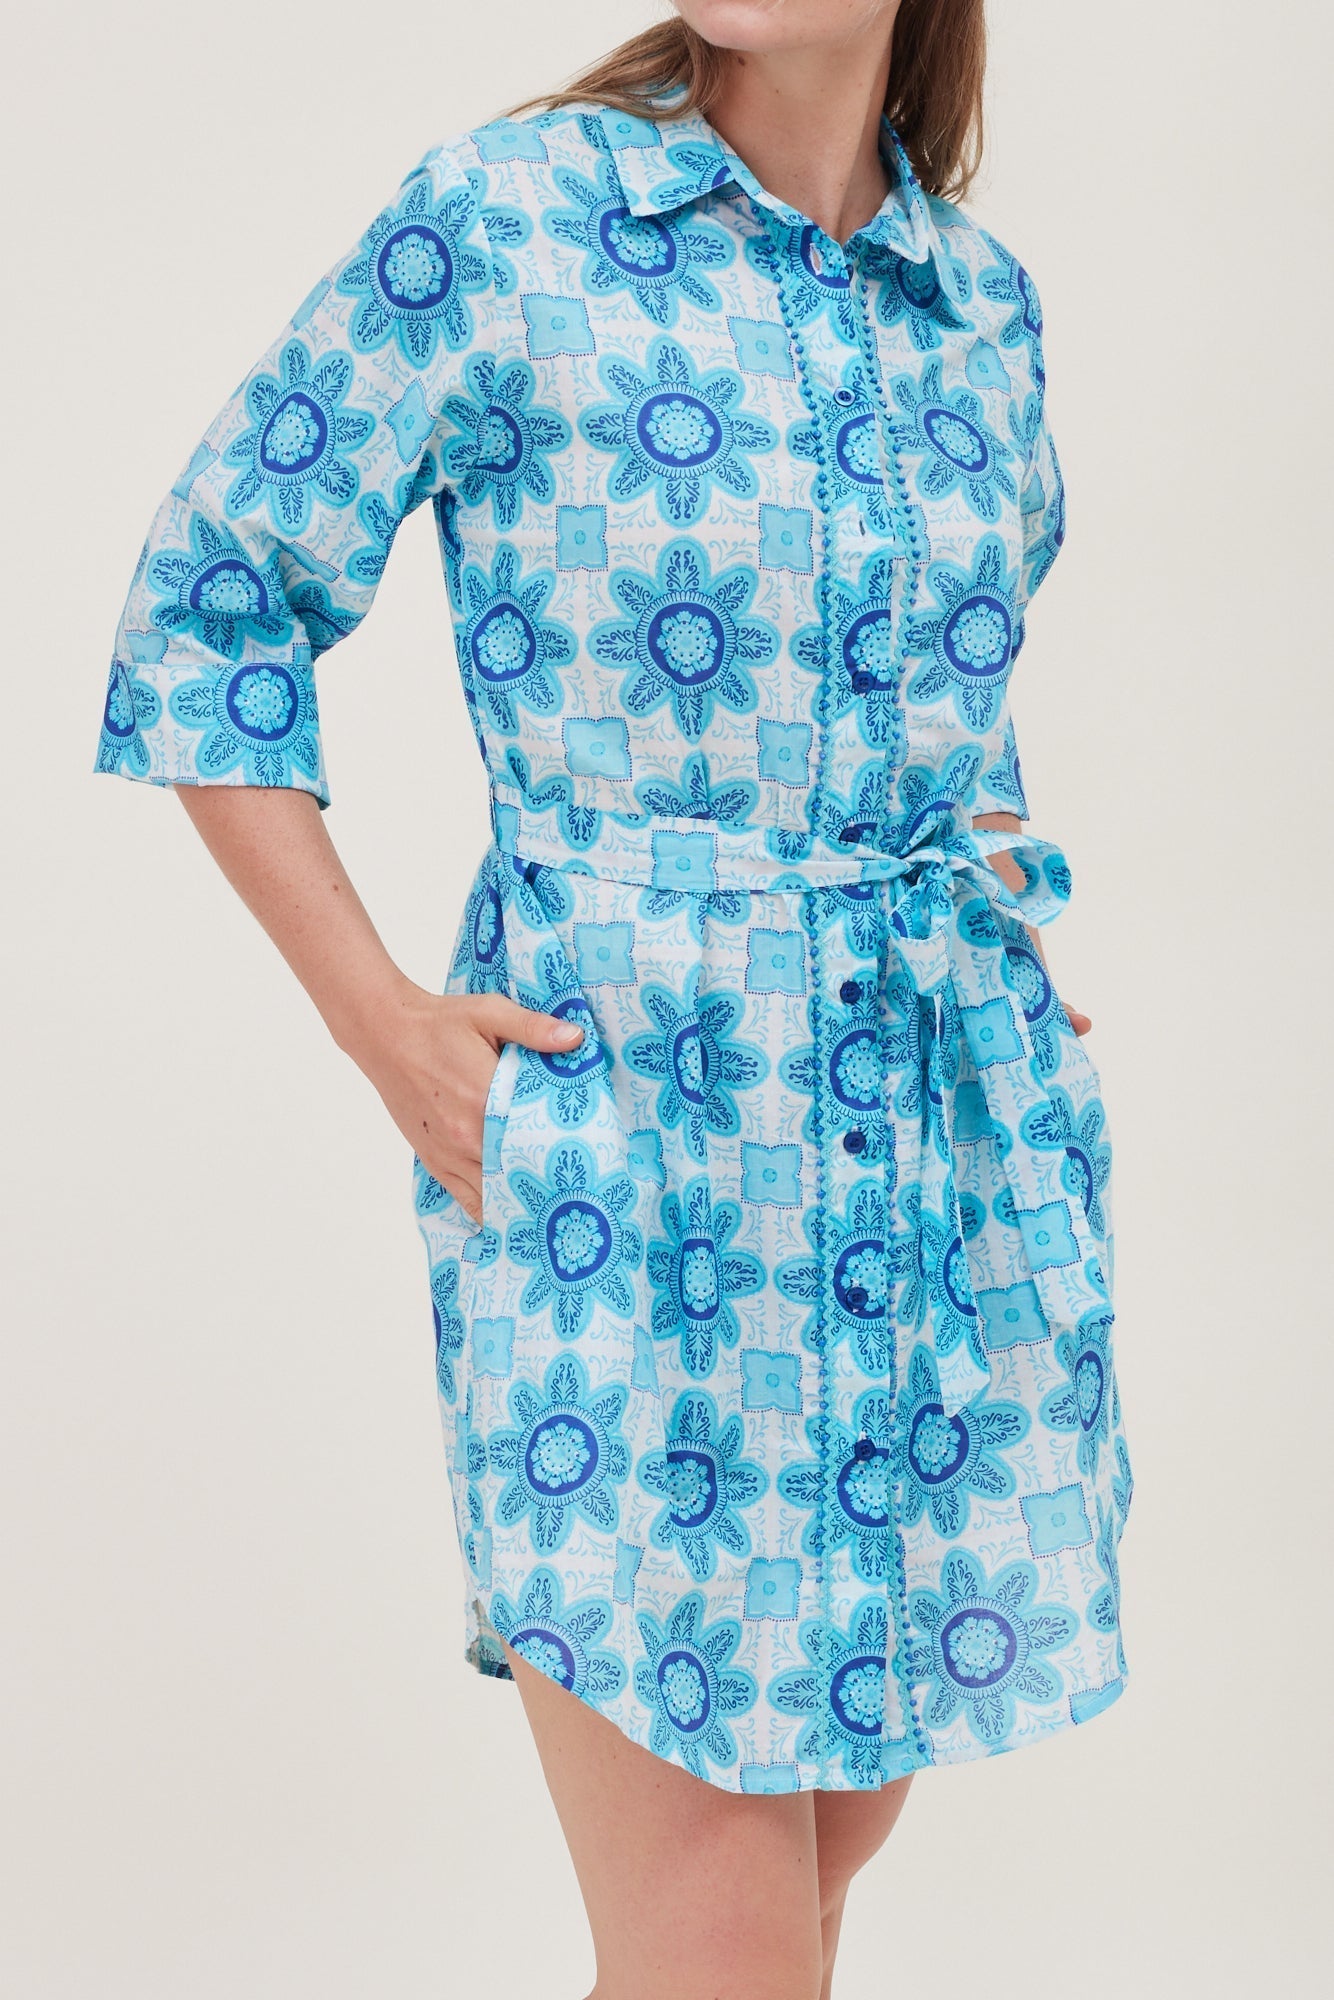 Carlotta Belted Shirt Dress in Blue Floral - Molly's! A Chic and Unique Boutique 